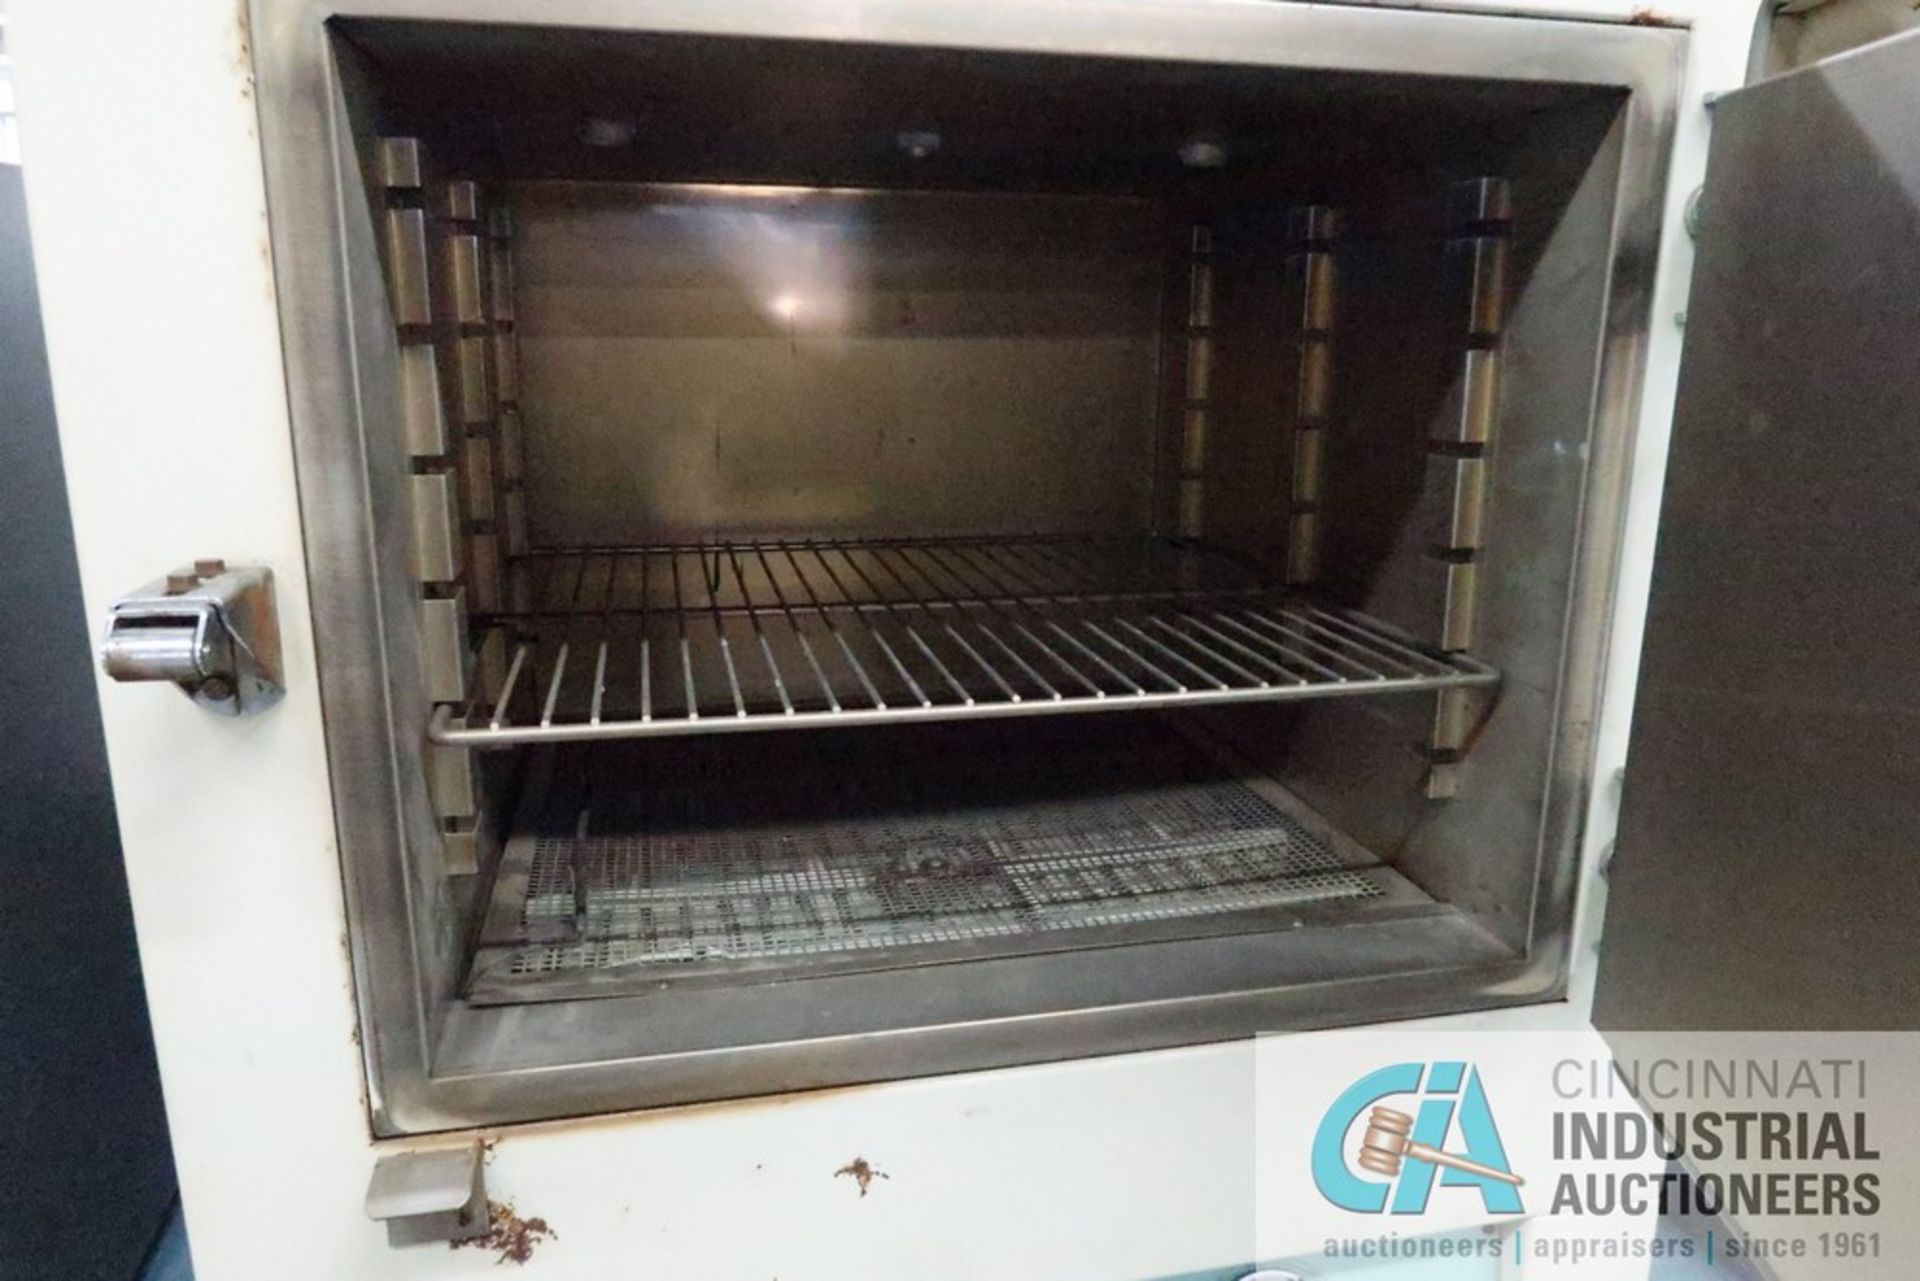 BLUE M MODEL OV-18A STABIL-THERM ELECTRIC GRAVITY OVEN; S/N DV1-11093, 100-550 DEGREE F - Image 3 of 4